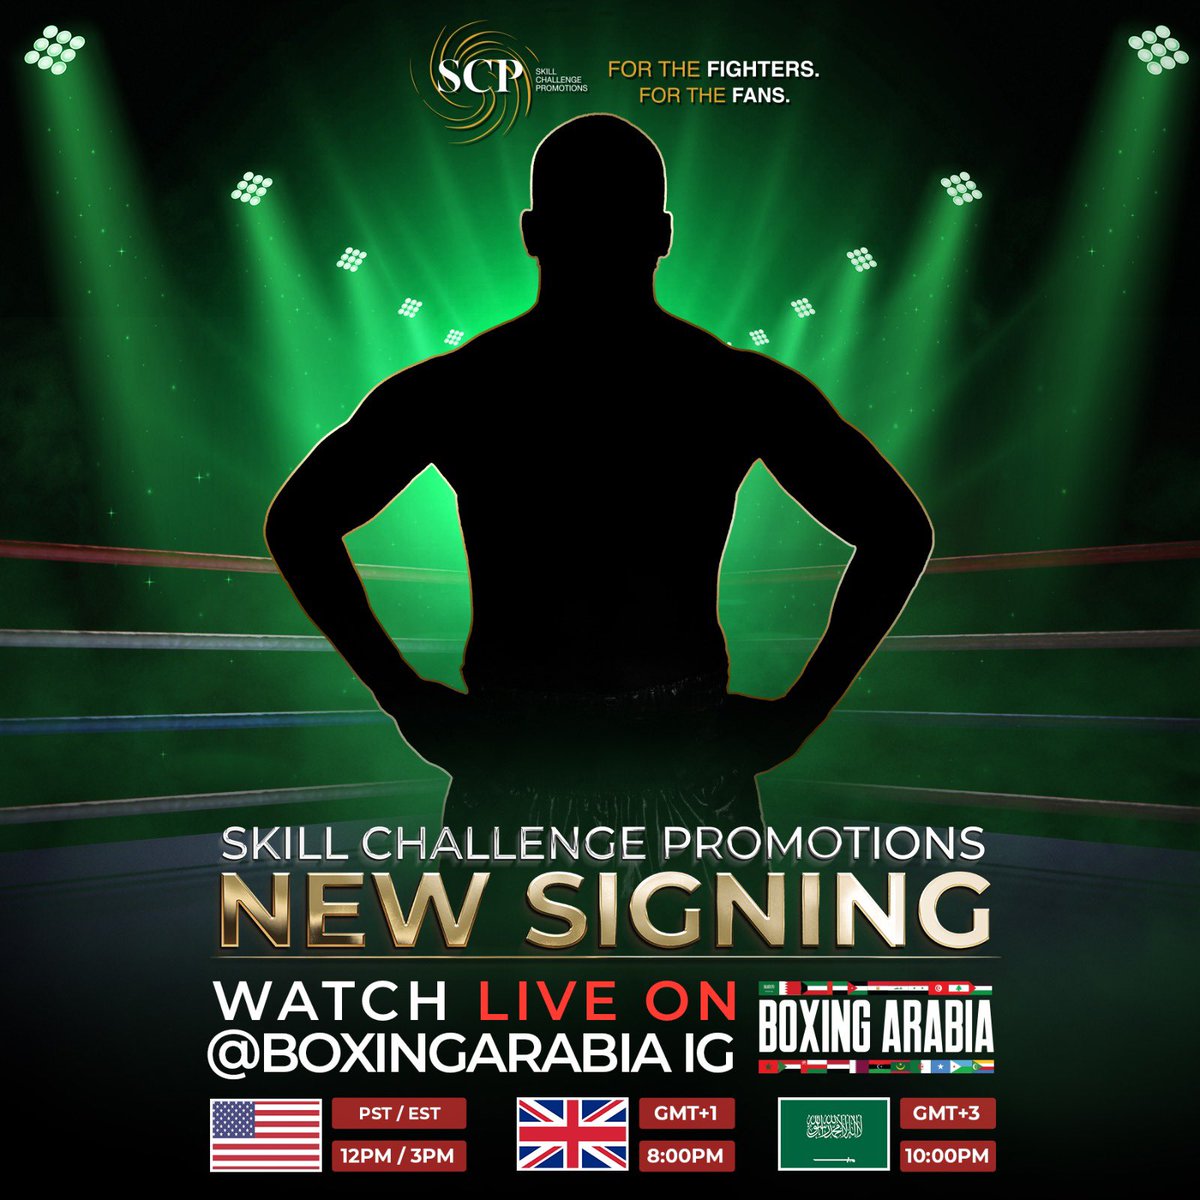 ⚔️NEW SIGNING⚔️ Join us TODAY on IG LIVE for the newest Skill Challenge Promotions signing!! Tune at 🇸🇦10pm Saudi, 🇺🇸 3pm EST/12pm PST, 🇬🇧 8pm UK time on any of the following pages: @Khaled_bigk @SkillChallengepromotions @boxingarabia #ForTheFIGHTERS #ForTheFANS